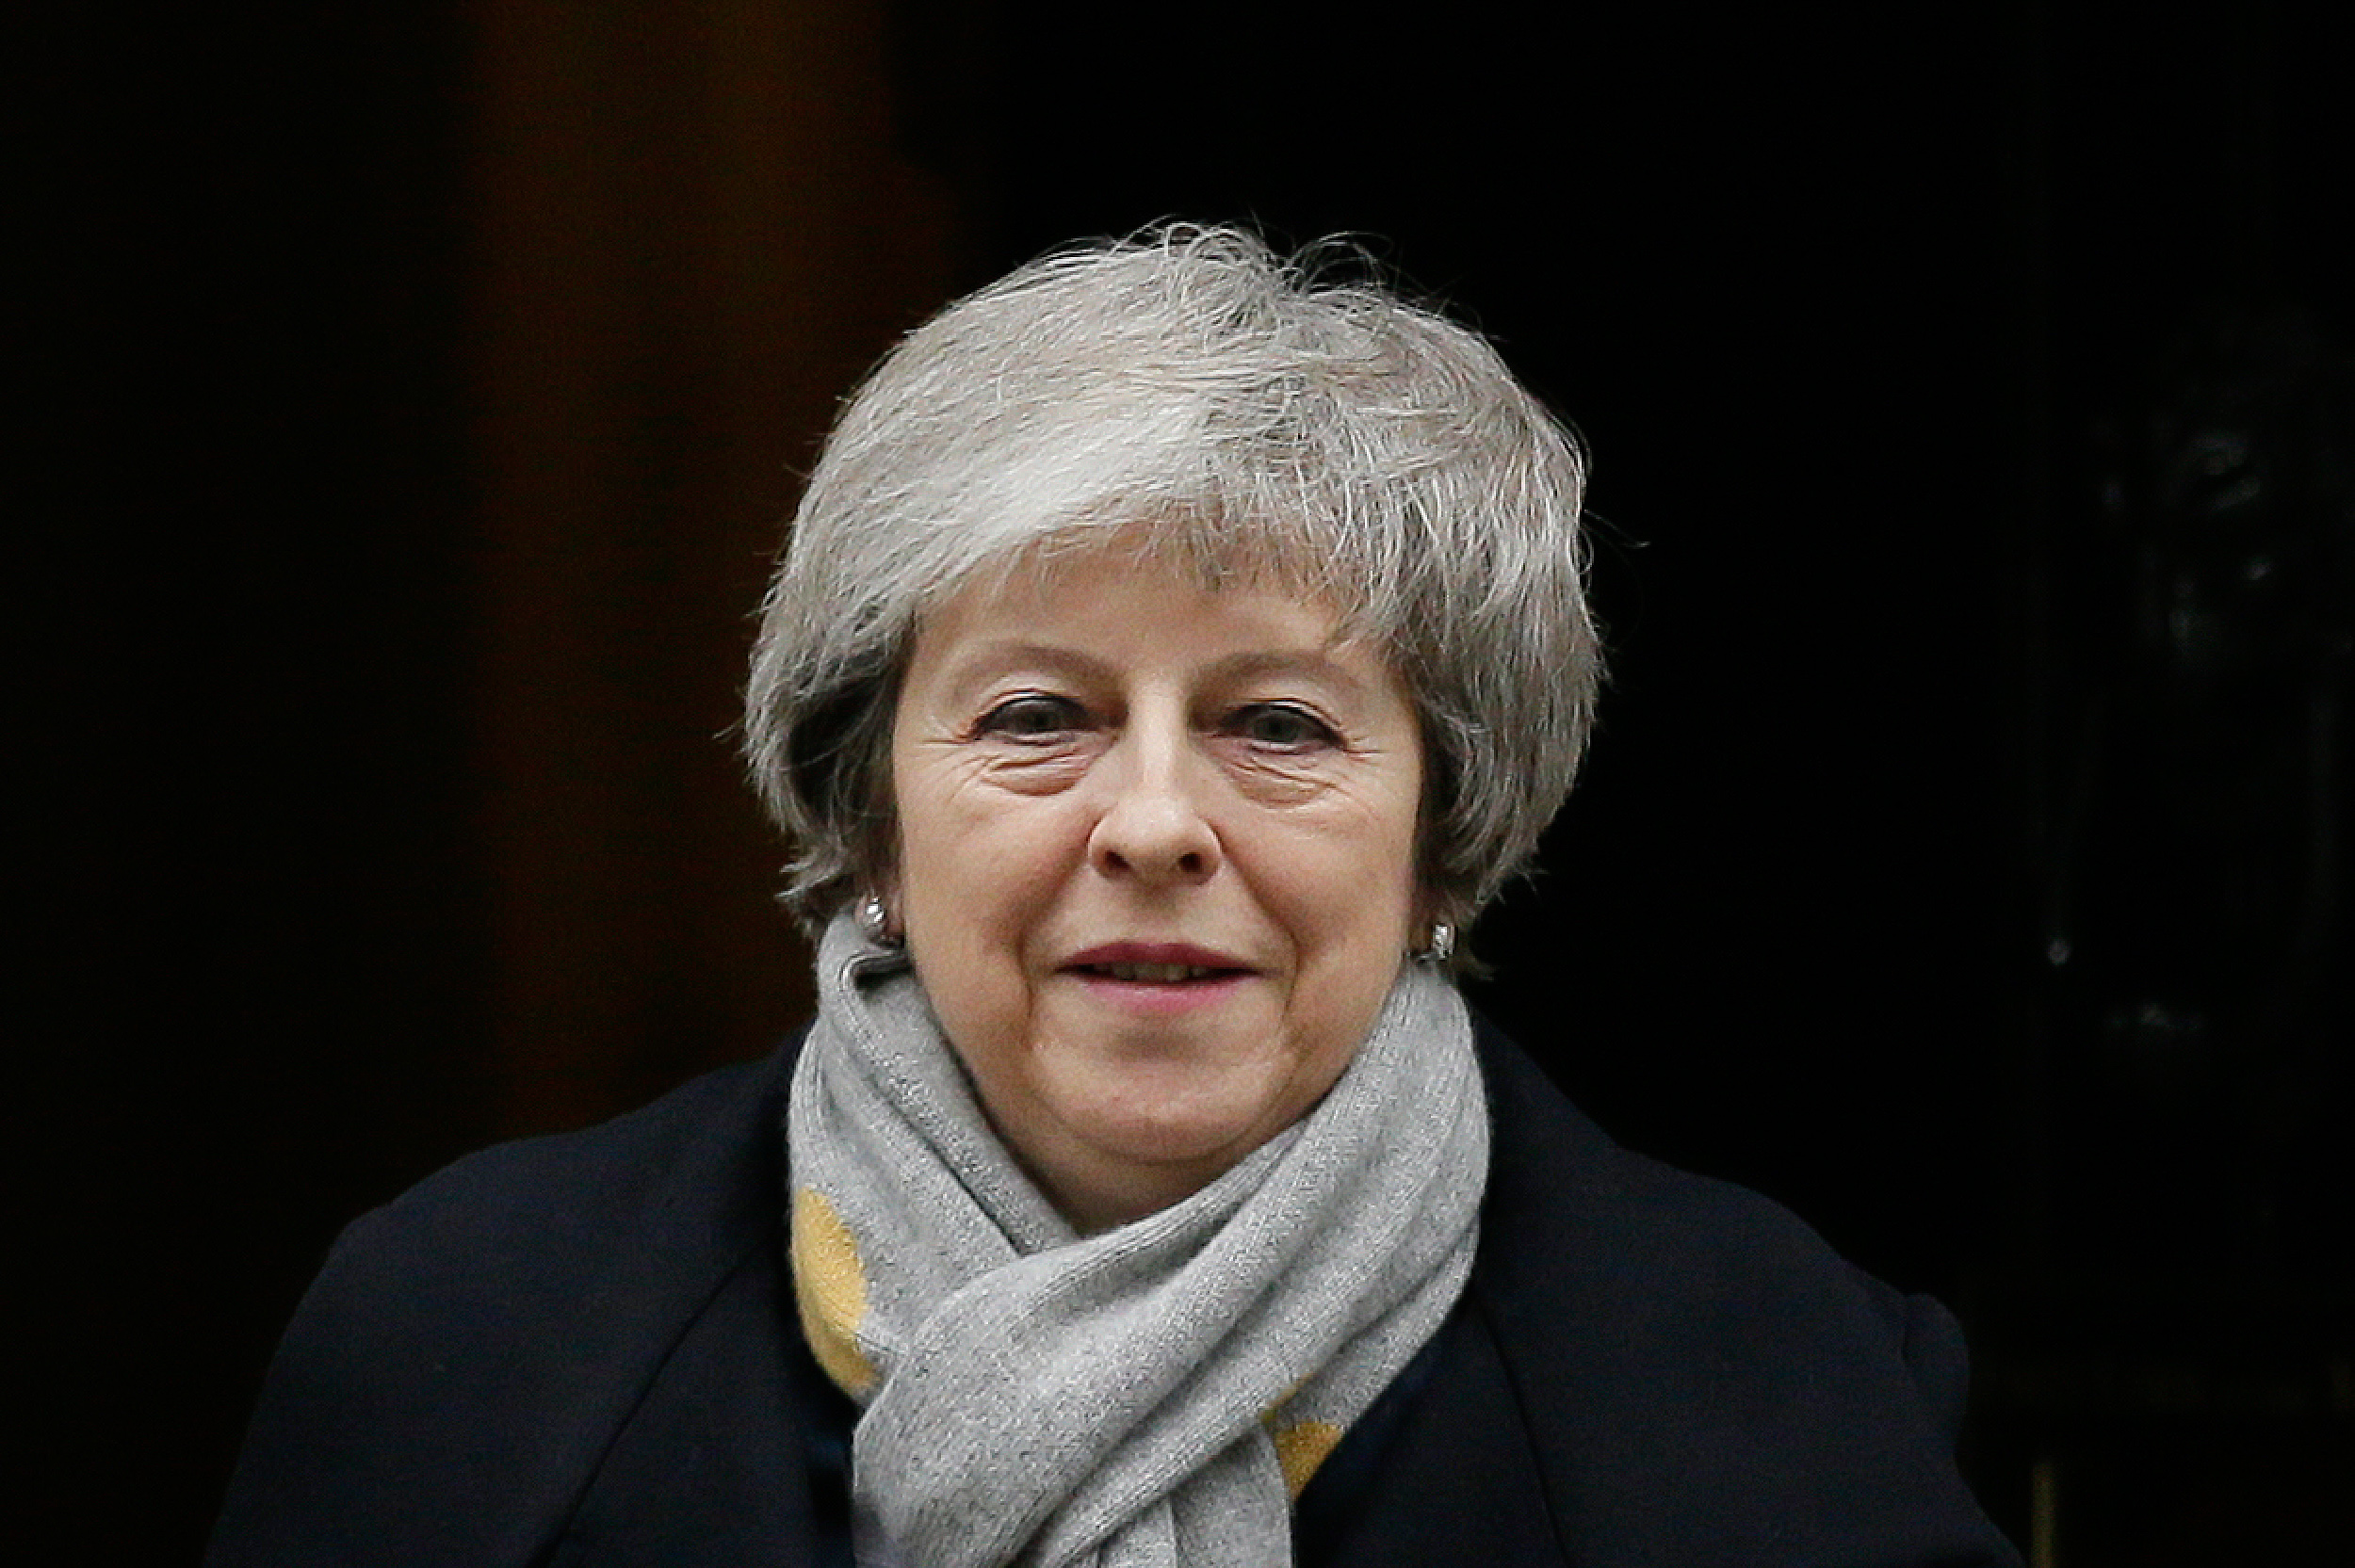 British PM May unveils her Brexit "Plan B" to parliament 